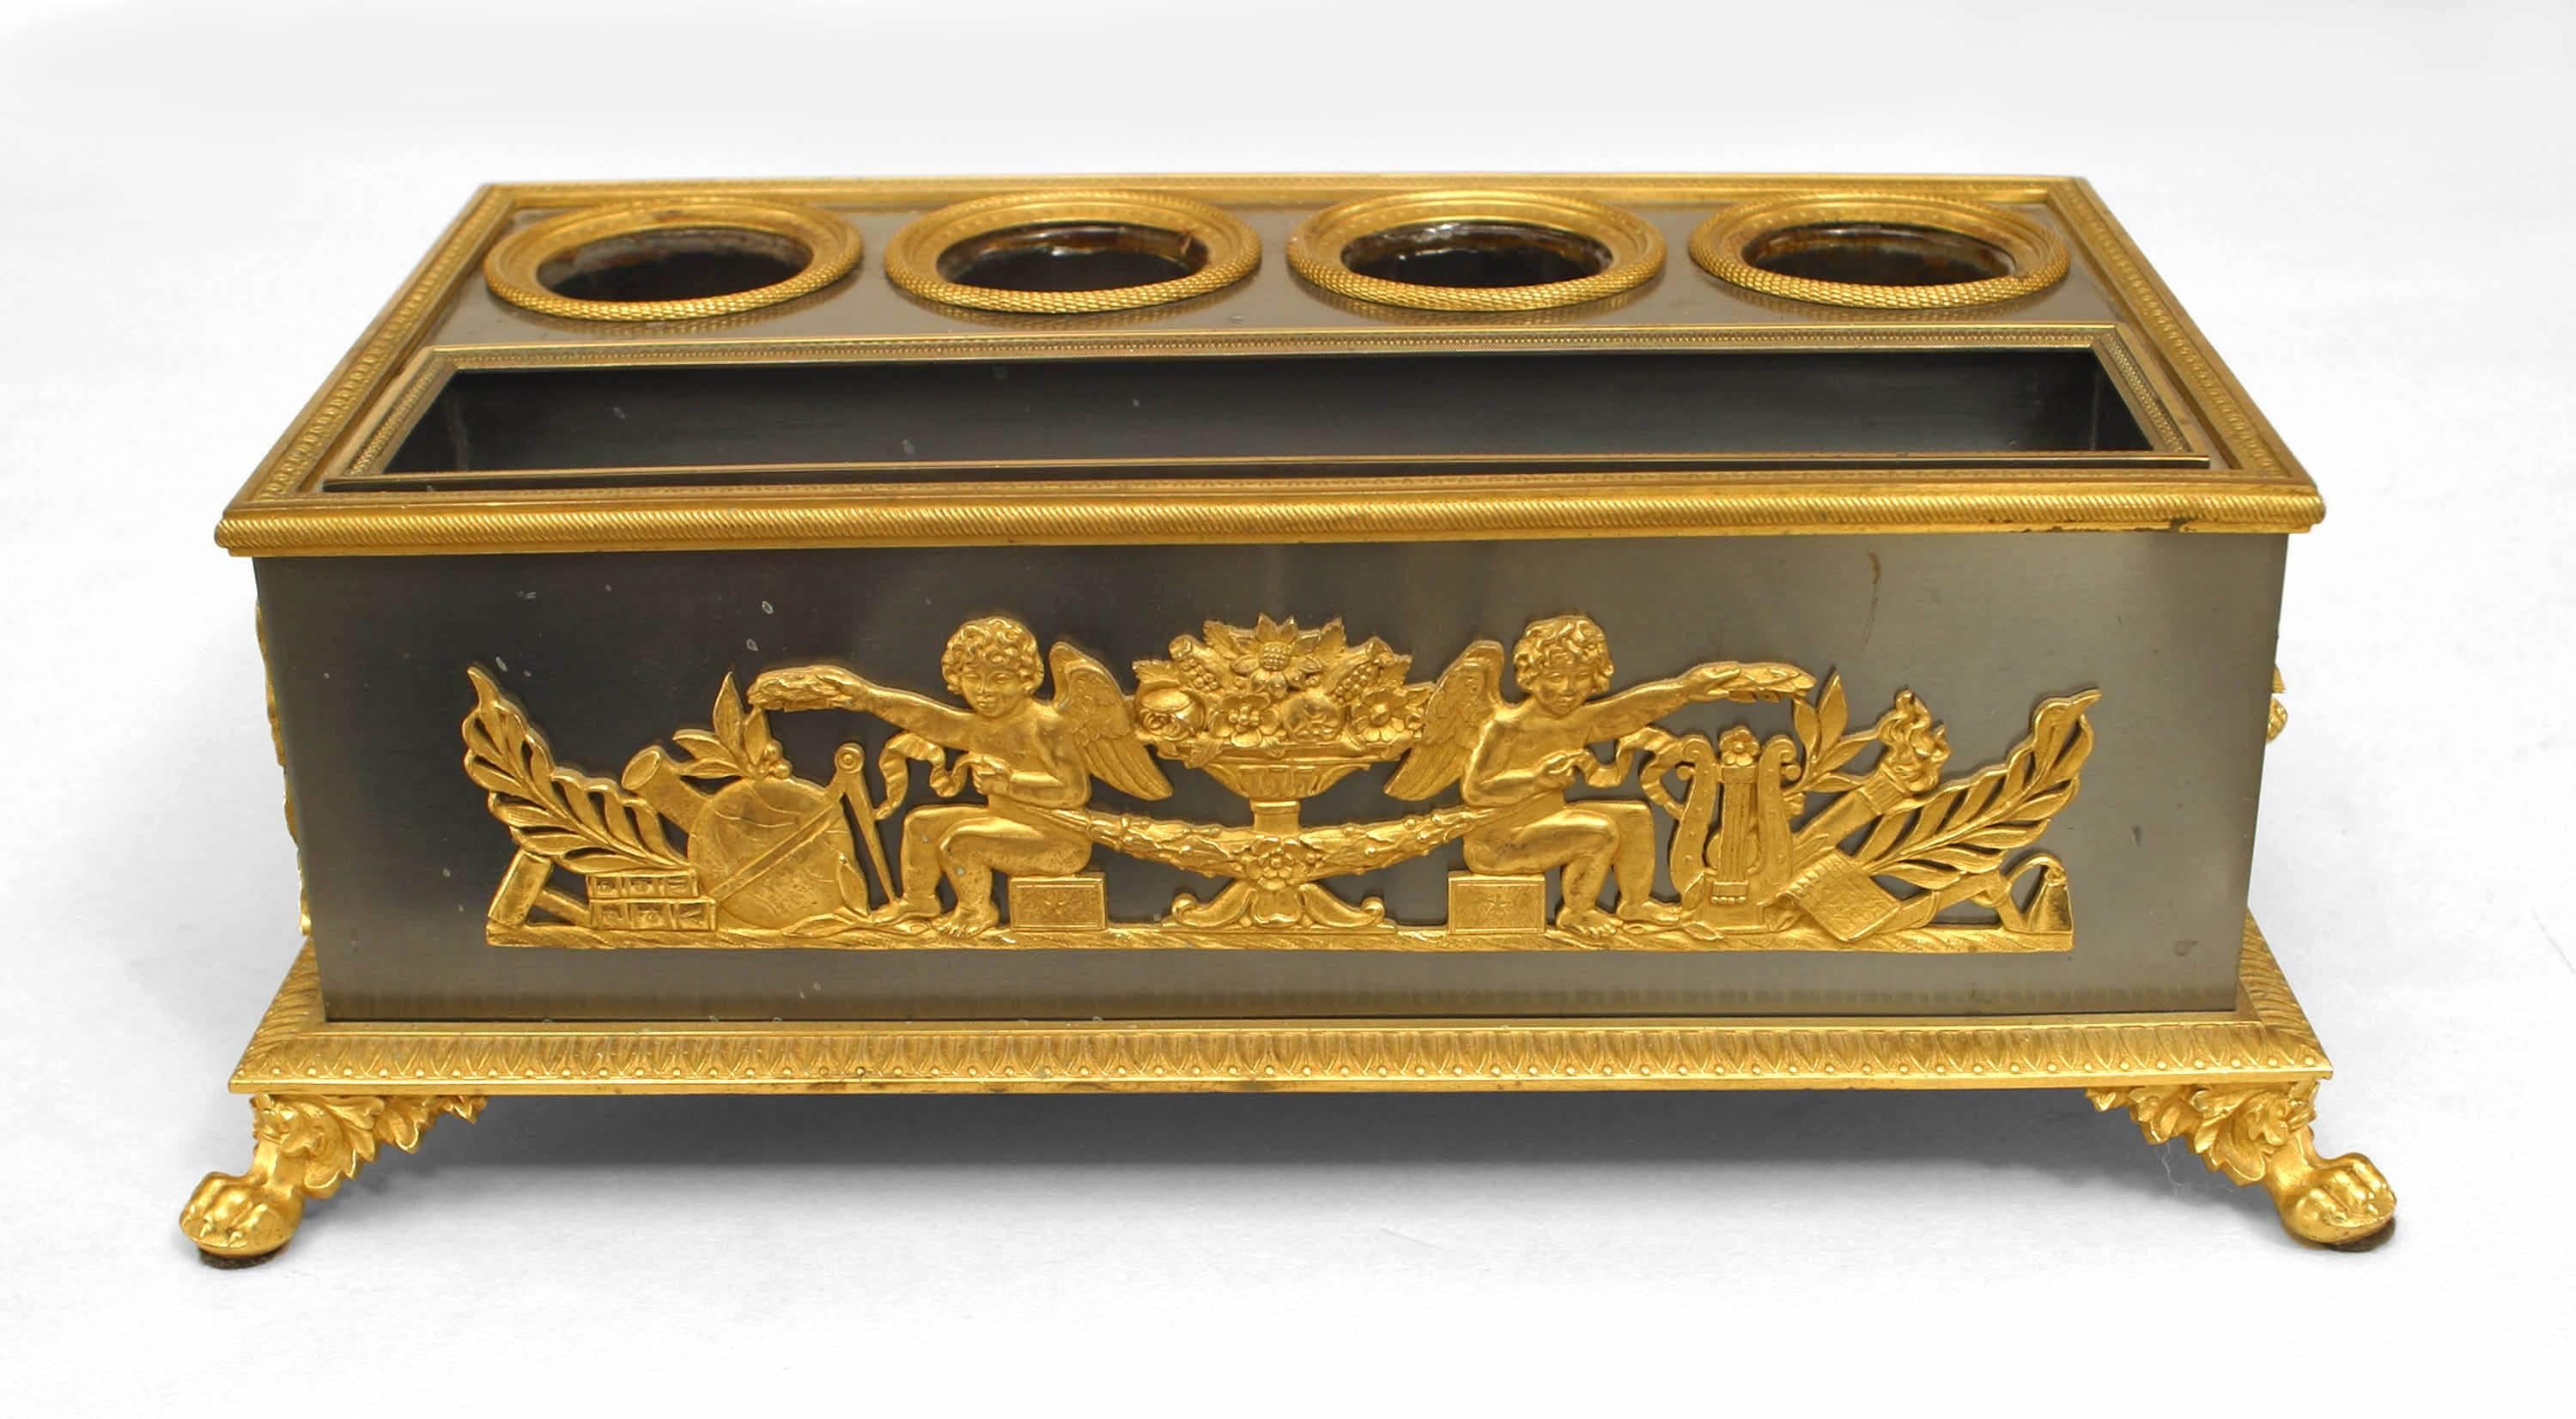 French Empire (19th Century) steel inkwell with gilt bronze trim with four original glass inserts and a side drawer.
